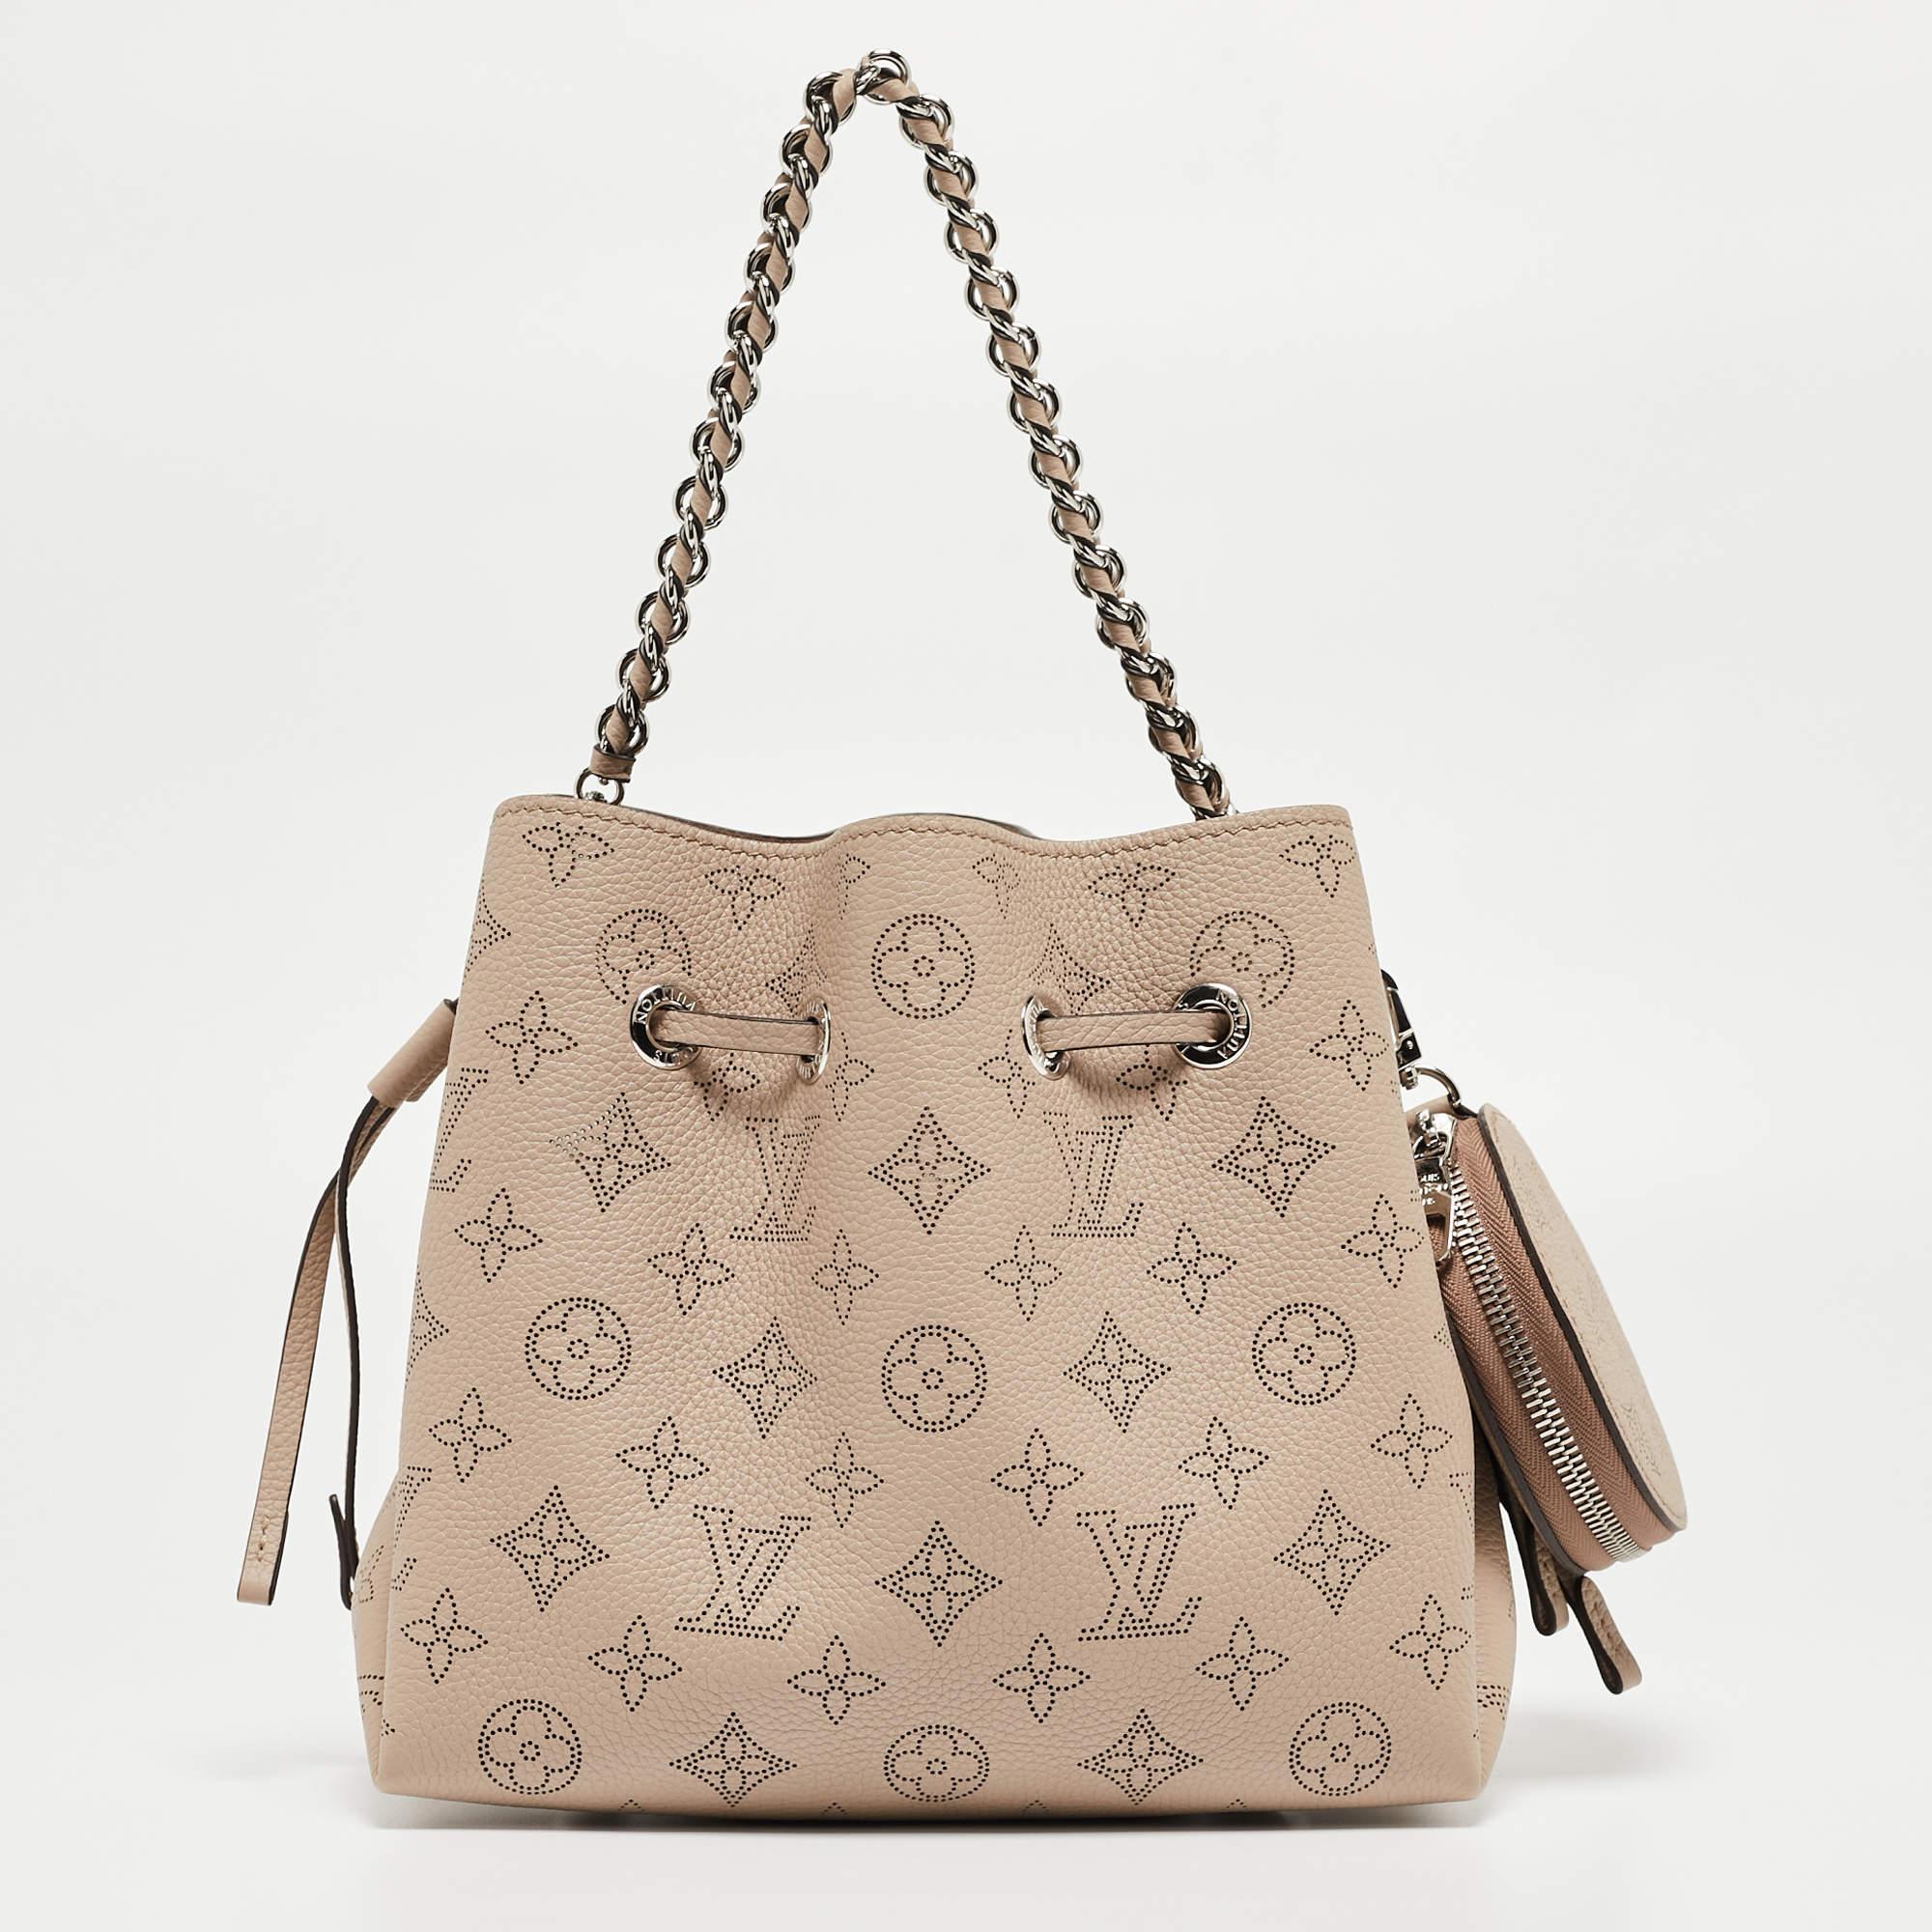 Known to create stylish, sophisticated, and timeless designs, Louis Vuitton is a brand worth investing in. The bags that come from this Parisian brand's atelier are exquisite. This Bella bag is no different. It has been made from Monogram Mahina